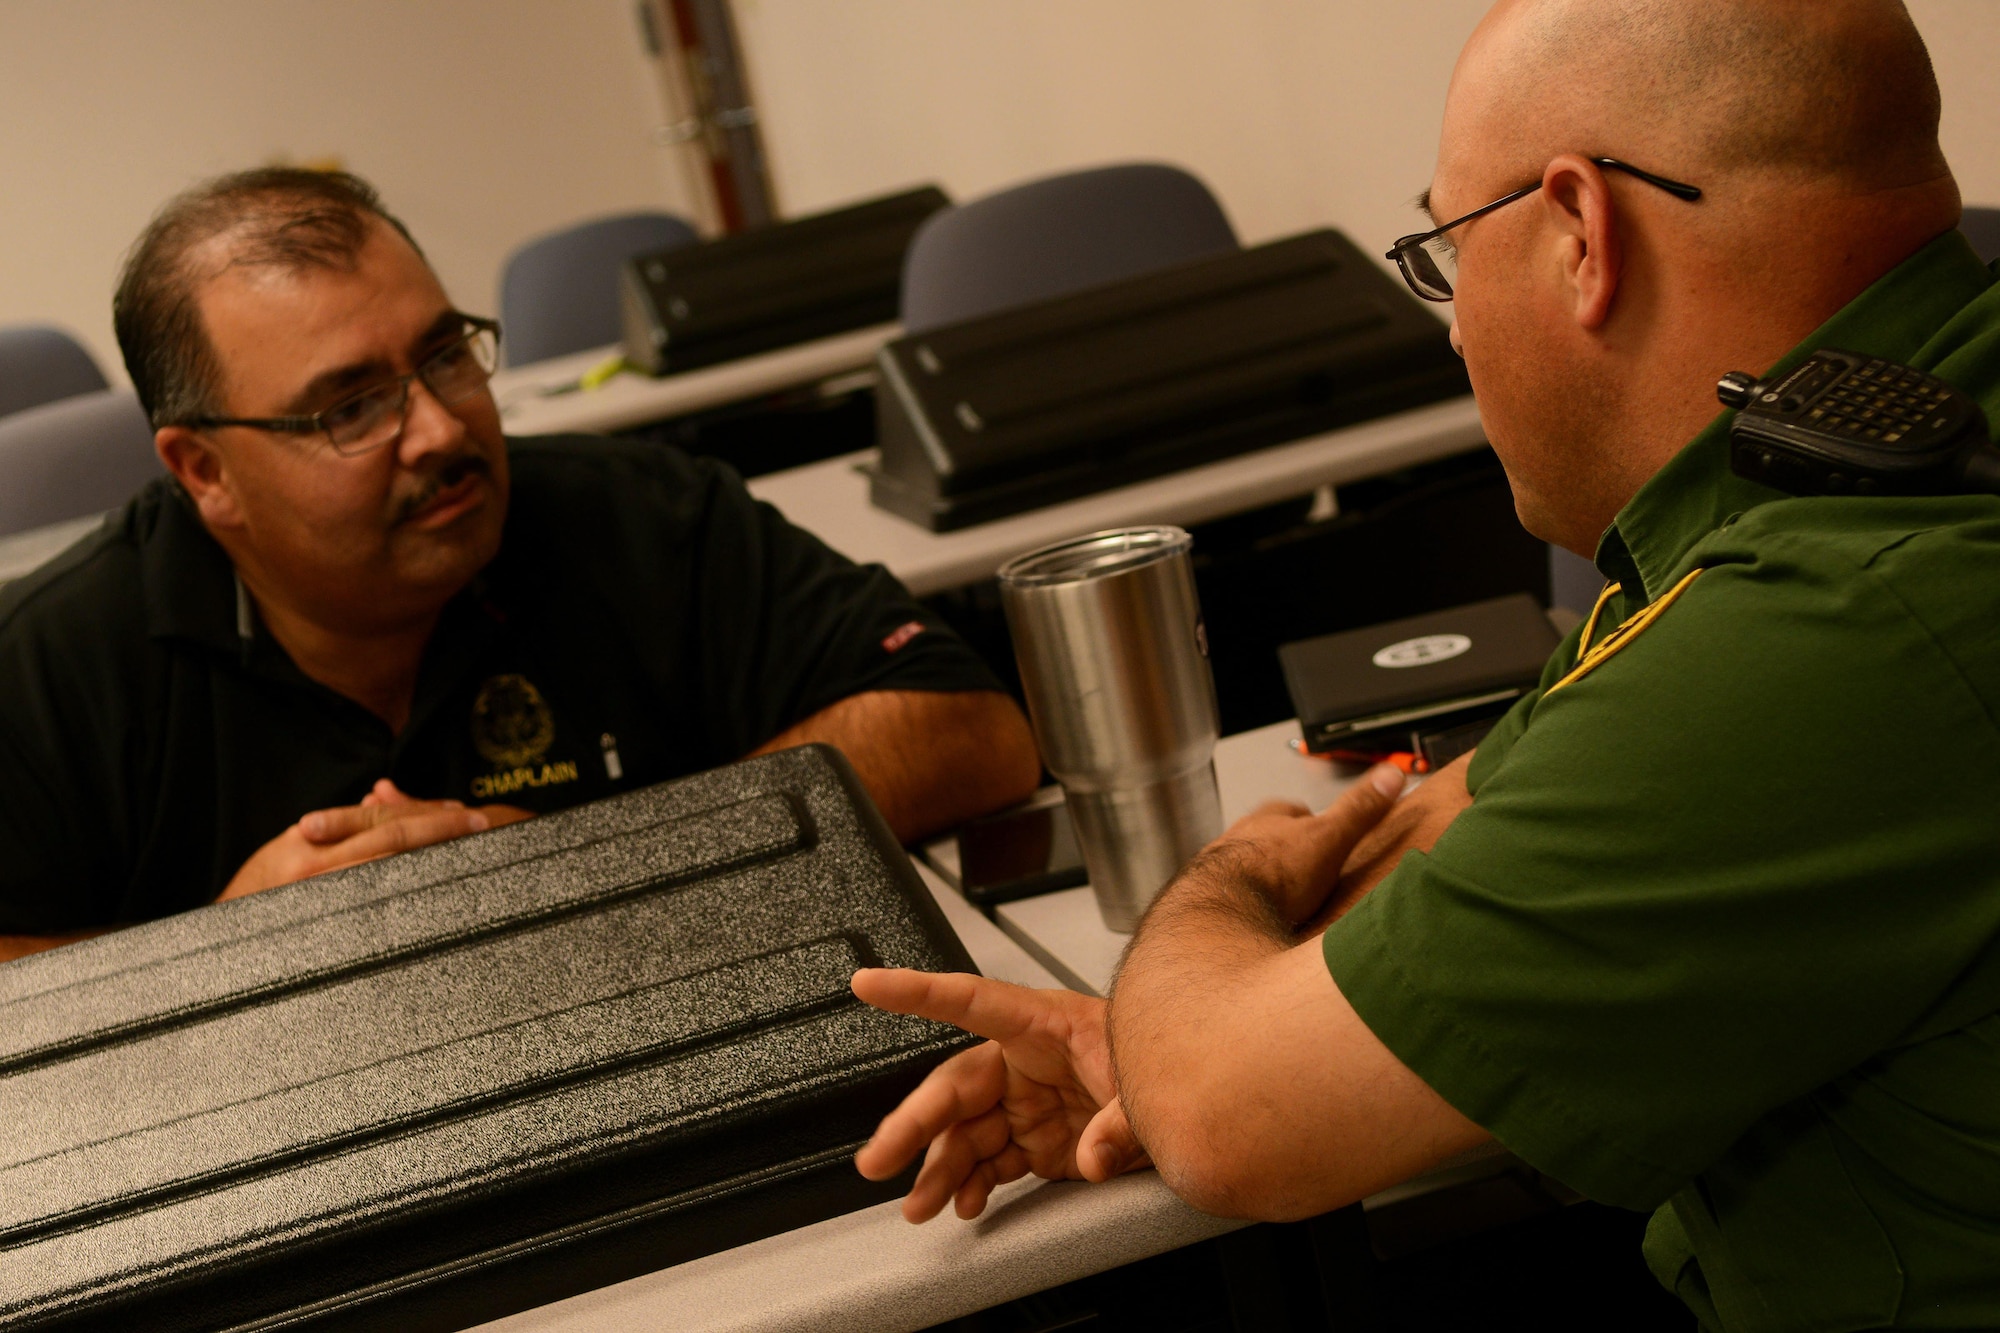 Two U.S. Customs and Border Protection chaplains exchange ideas at the CBP Del Rio Border Patrol Sector in Del Rio, Texas, Sept. 21, 2015. September, suicide prevention month, is the month that gives us the chance to recognize and educate the threat suicide poses to our society and how to cope with the feelings of depression, hopelessness and helplessness. (U.S. Air Force photo by Airman 1st Class Ariel D. Partlow) (Released)